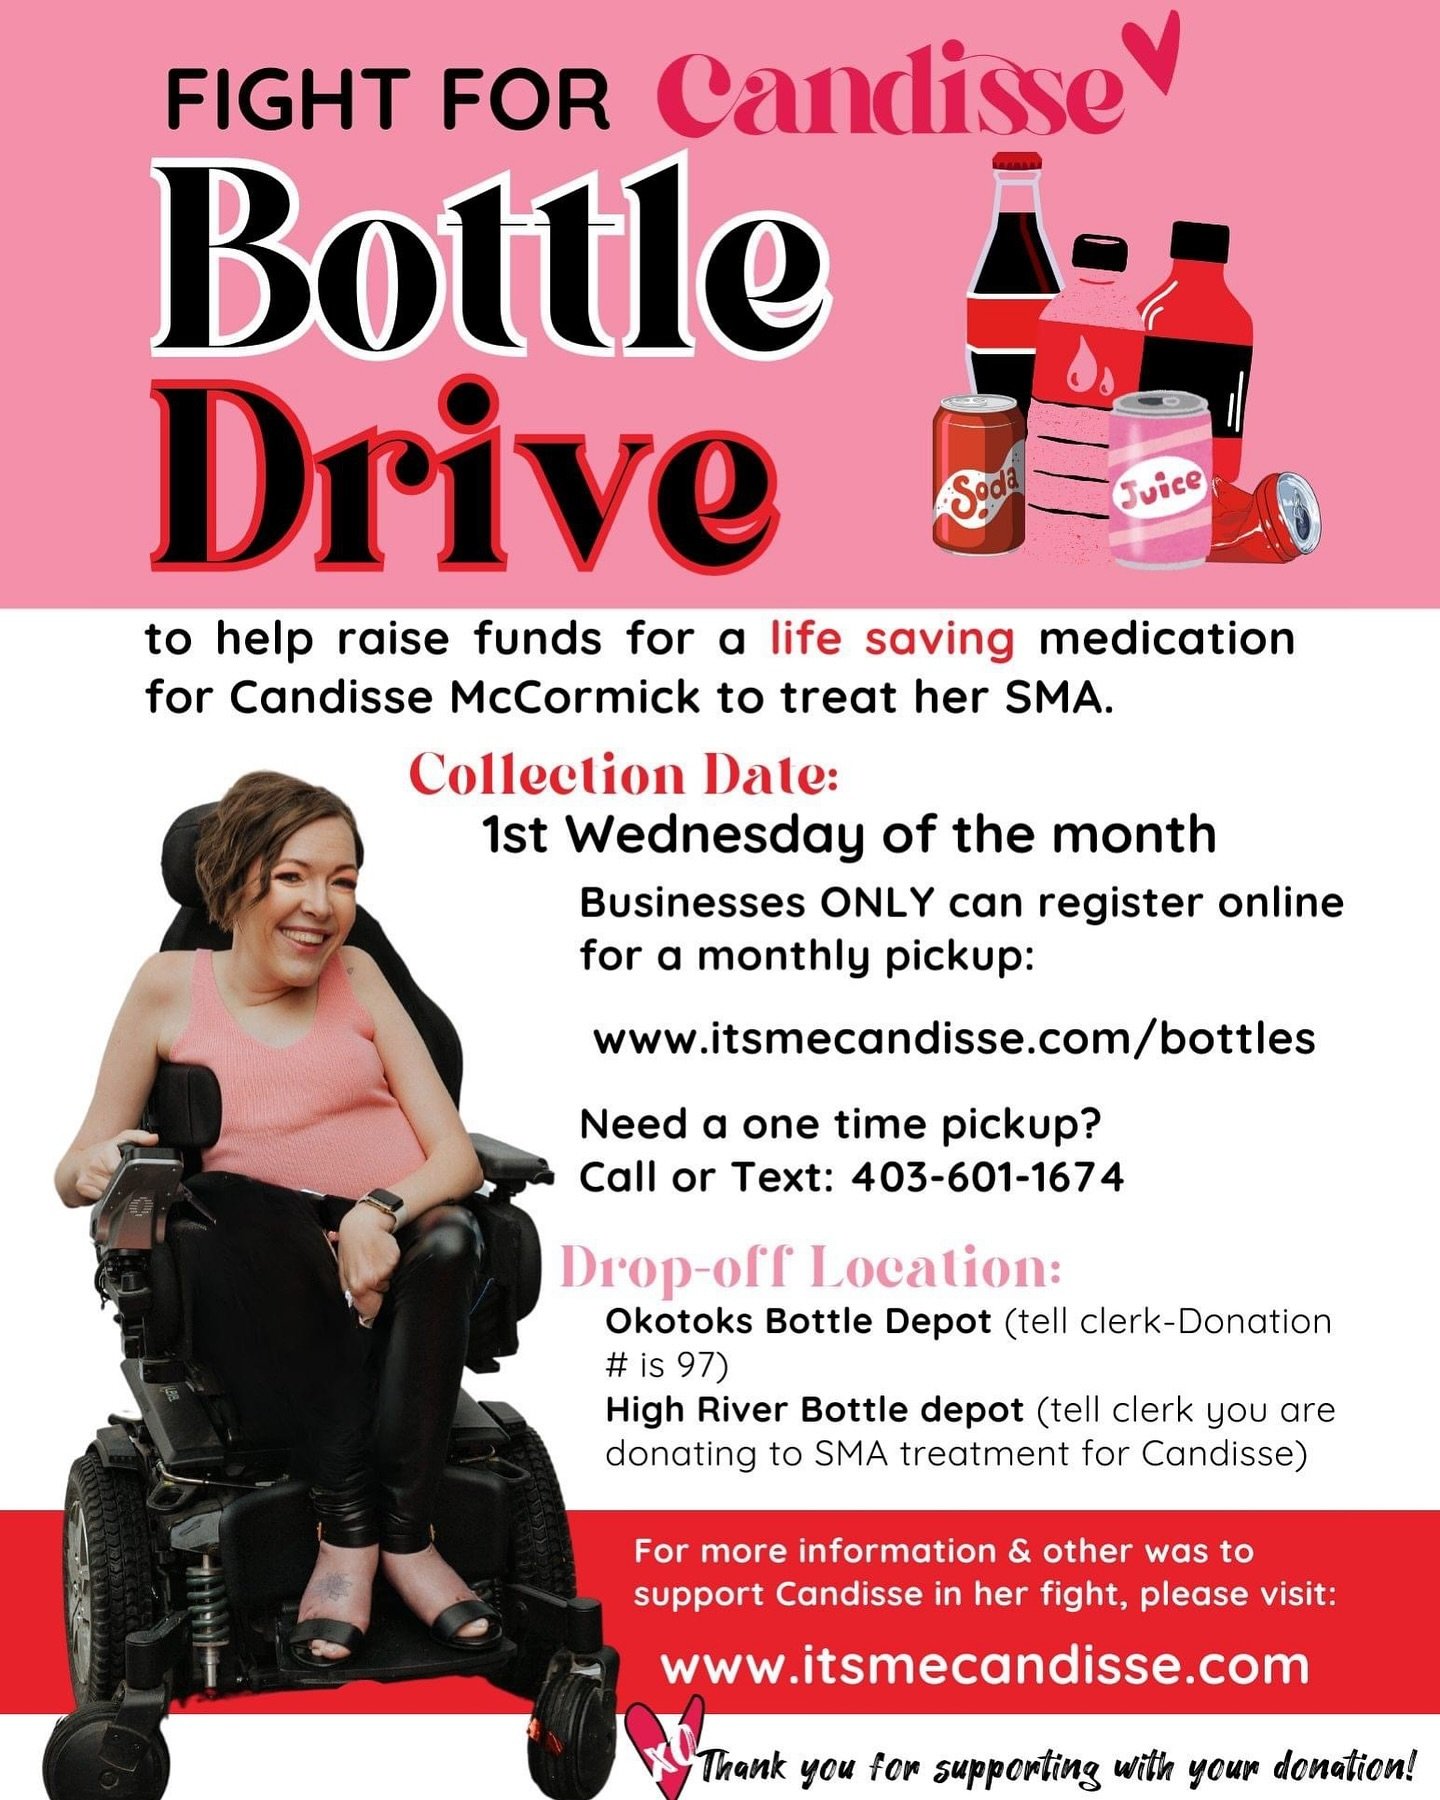 🌟 Calling all businesses in Okotoks and High River area! 🌟

Join the fight for Candisse&rsquo;s life-saving treatment by participating in our Bottle Drive! Every can counts in our mission to support Candisse&rsquo;s journey towards accessing life-s